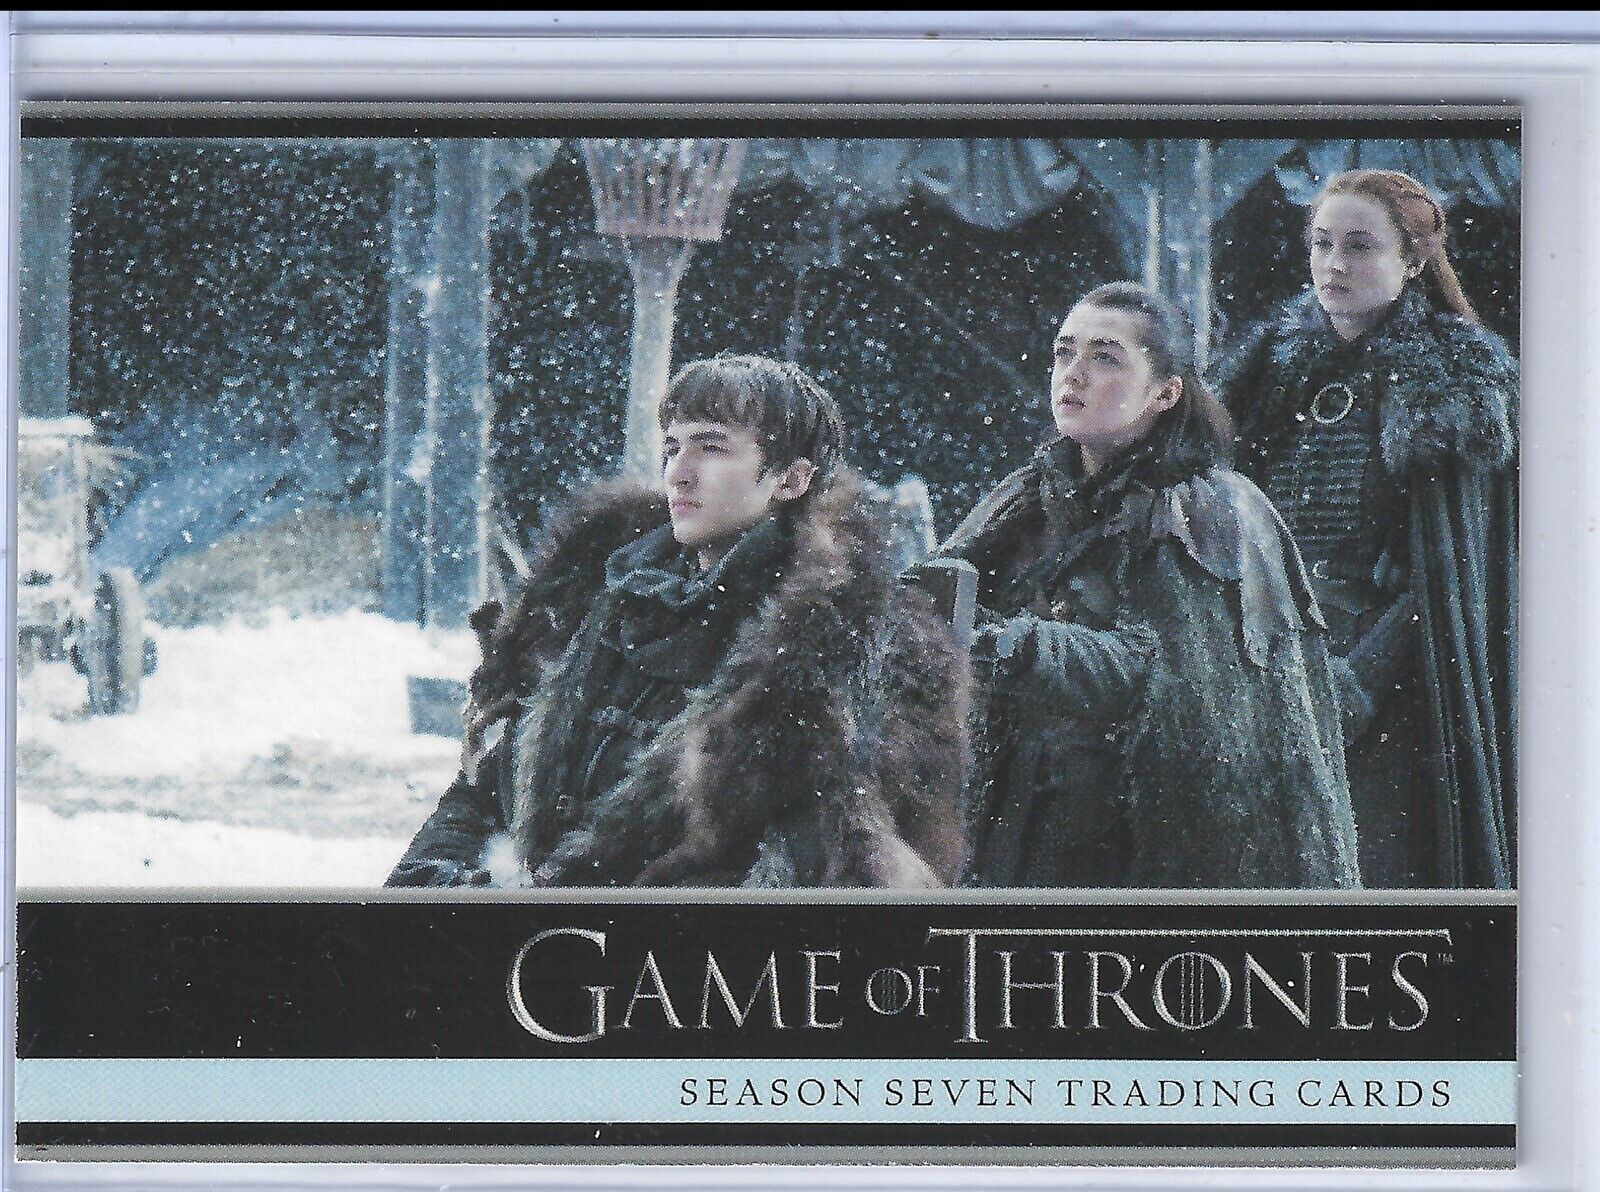 Game of Thrones Season 7 Promo Card P4 Philly Show Spring 2018 Rittenhouse SFC